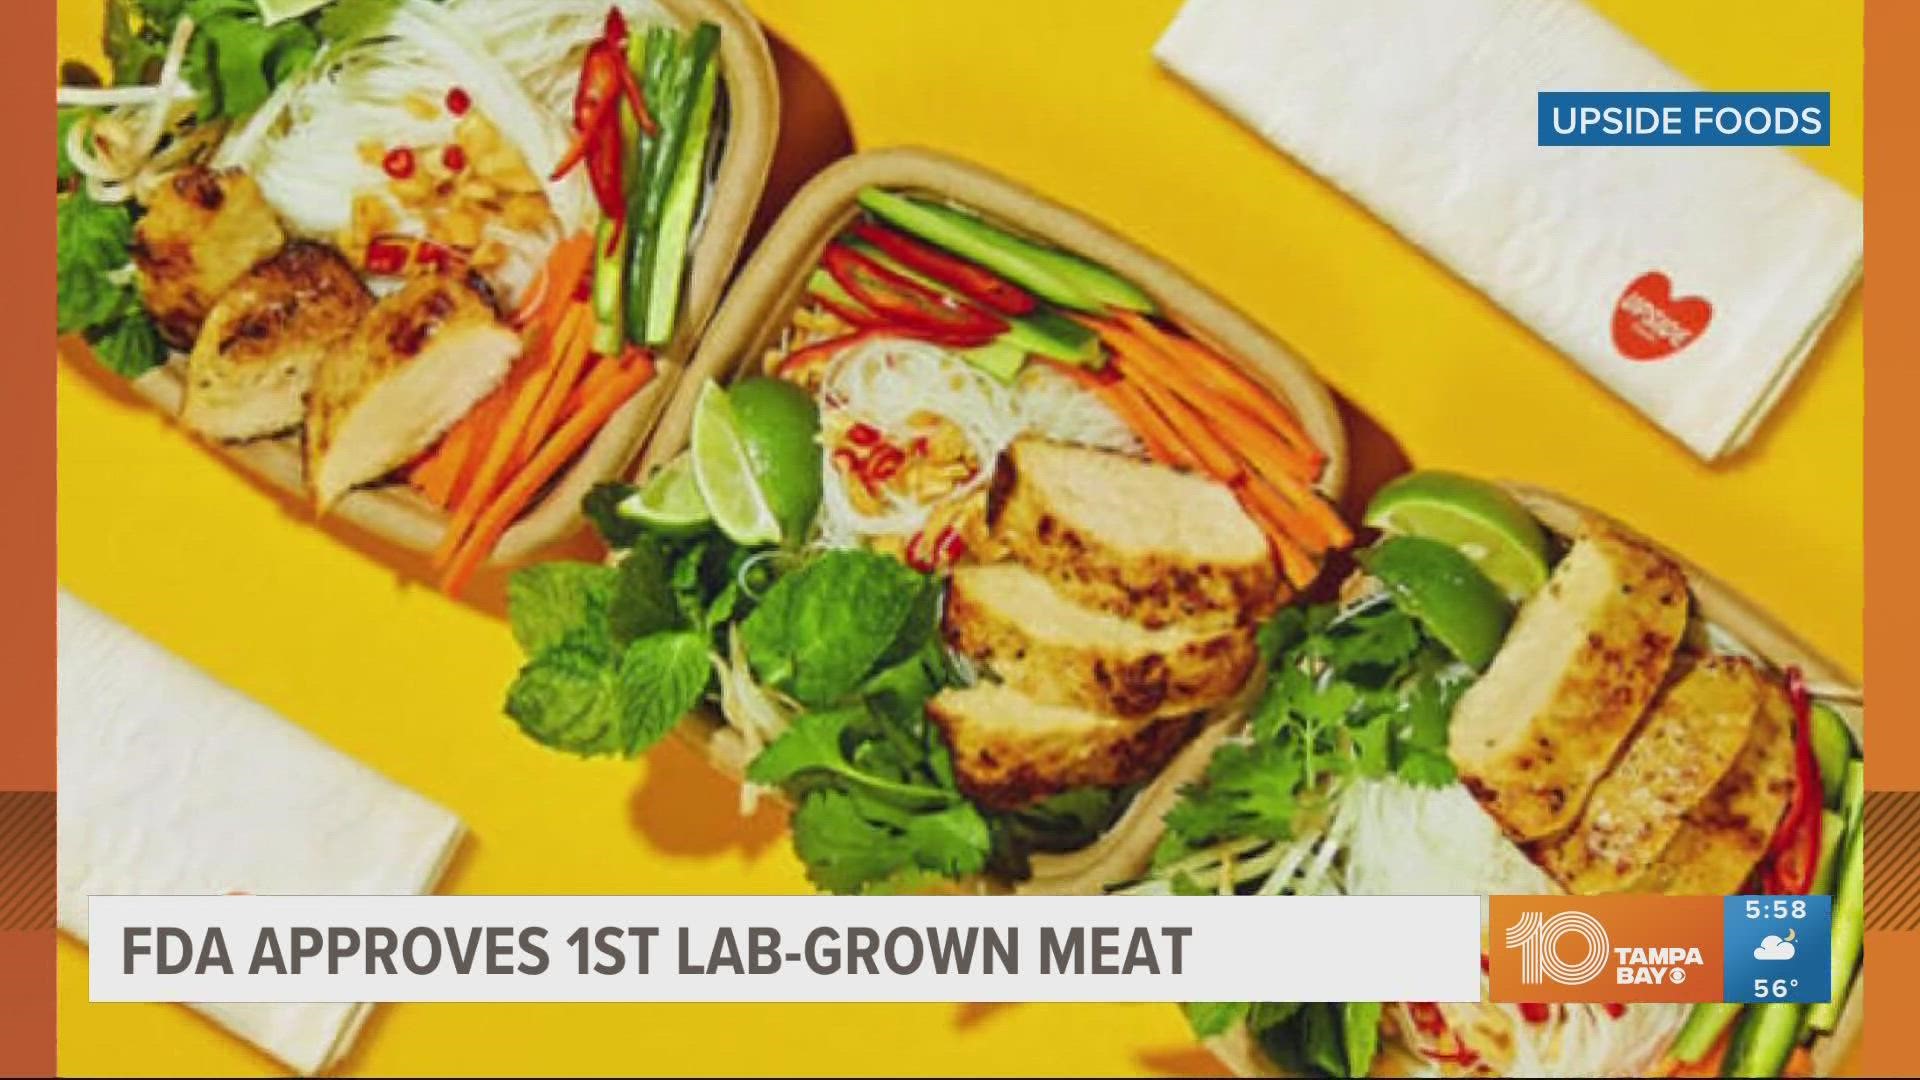 Producers say the use of lab-grown meat could cut down on greenhouse gases.